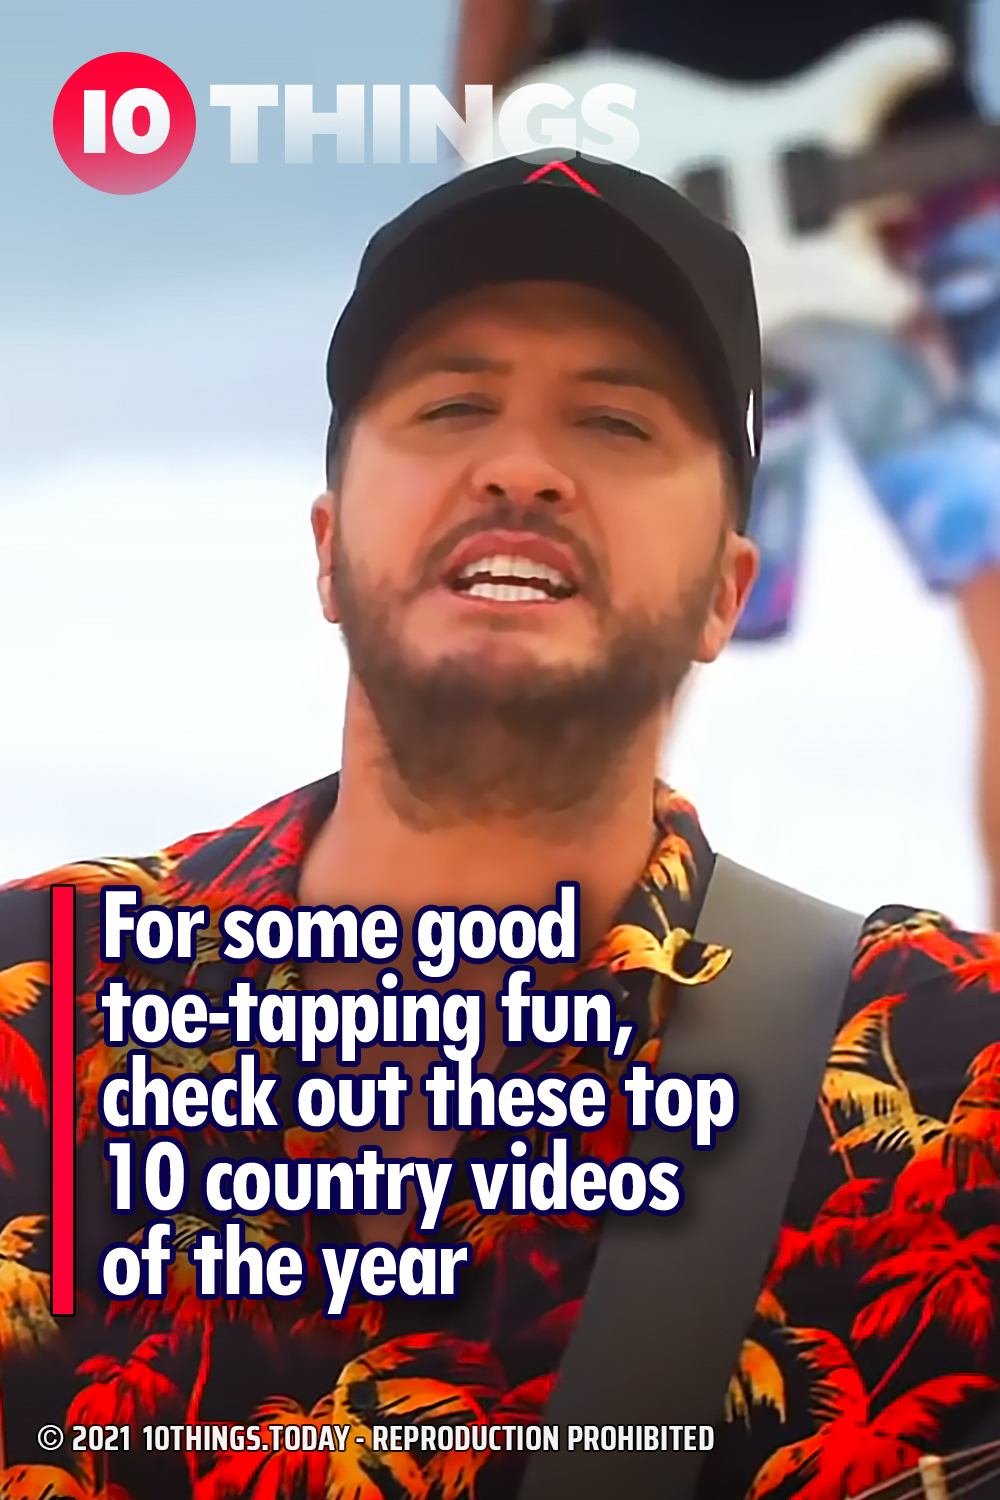 For some good toe-tapping fun, check out these top 10 country videos of the year